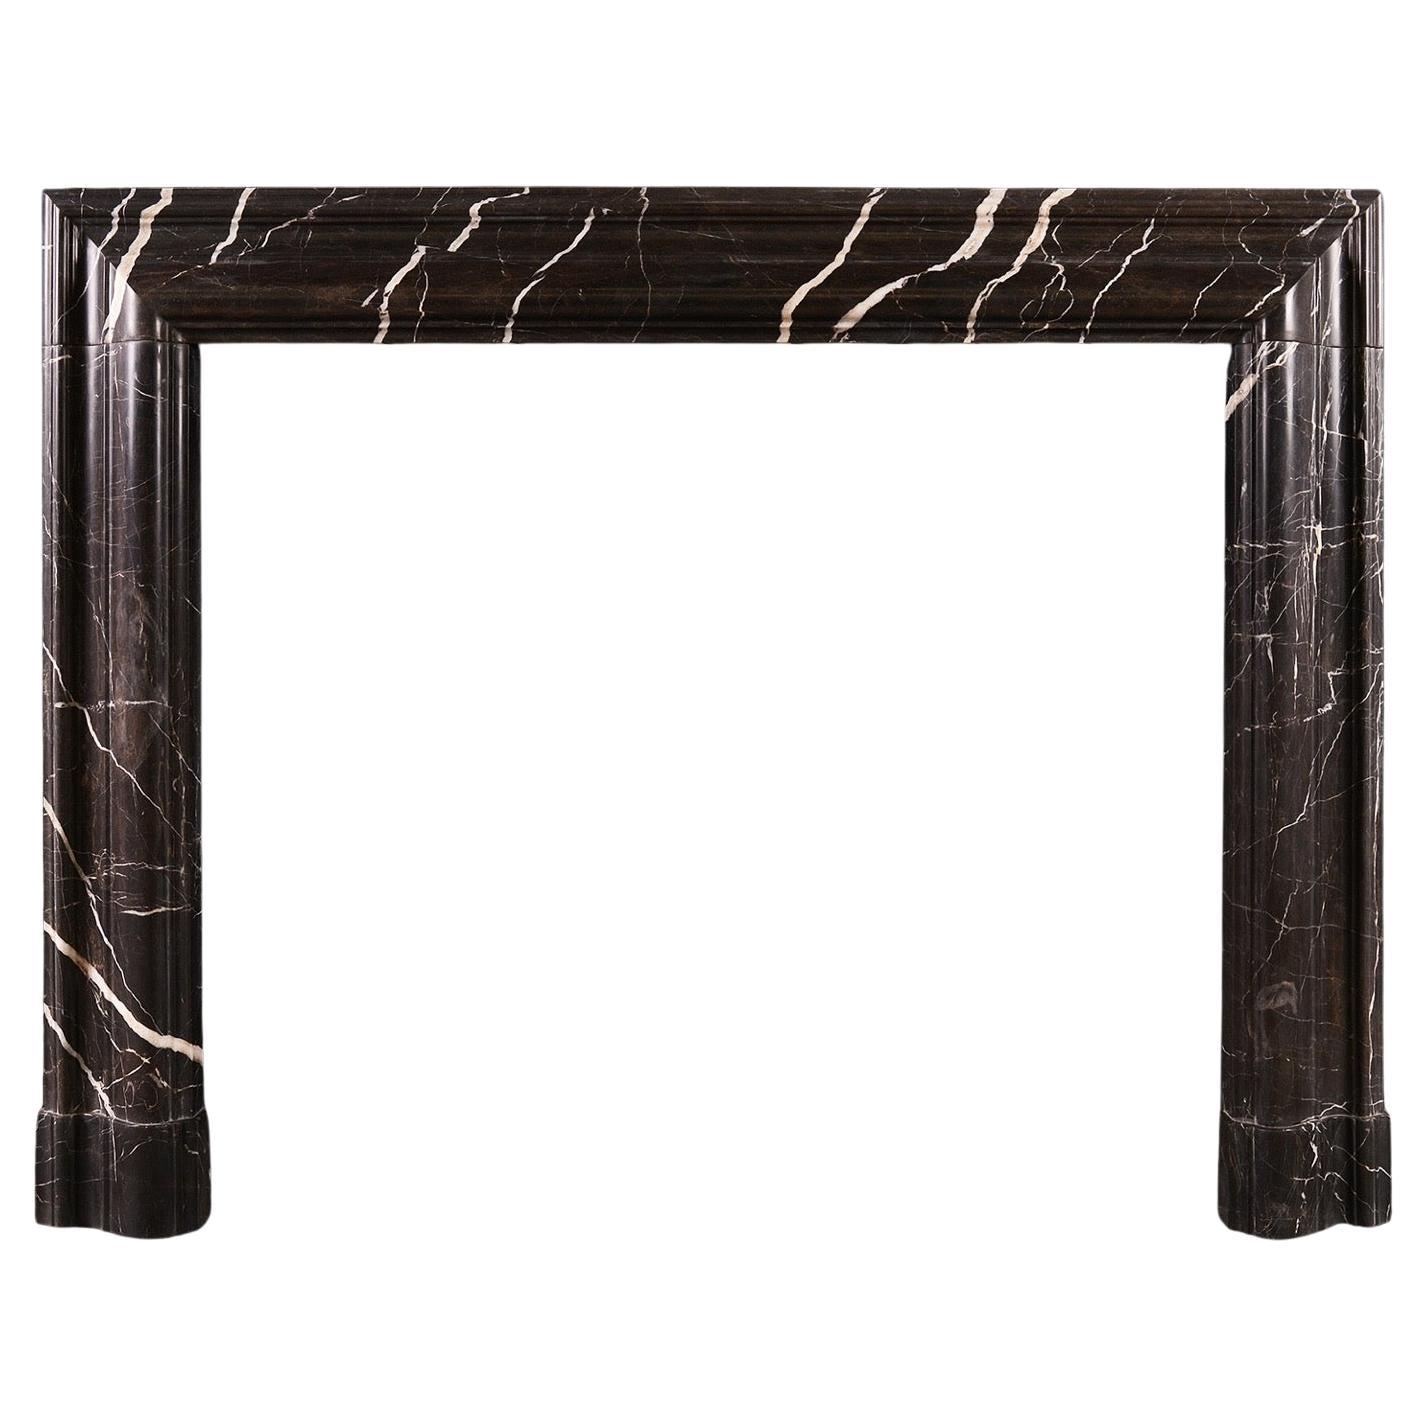 A Bolection Fireplace in Bruno Marquina Marble